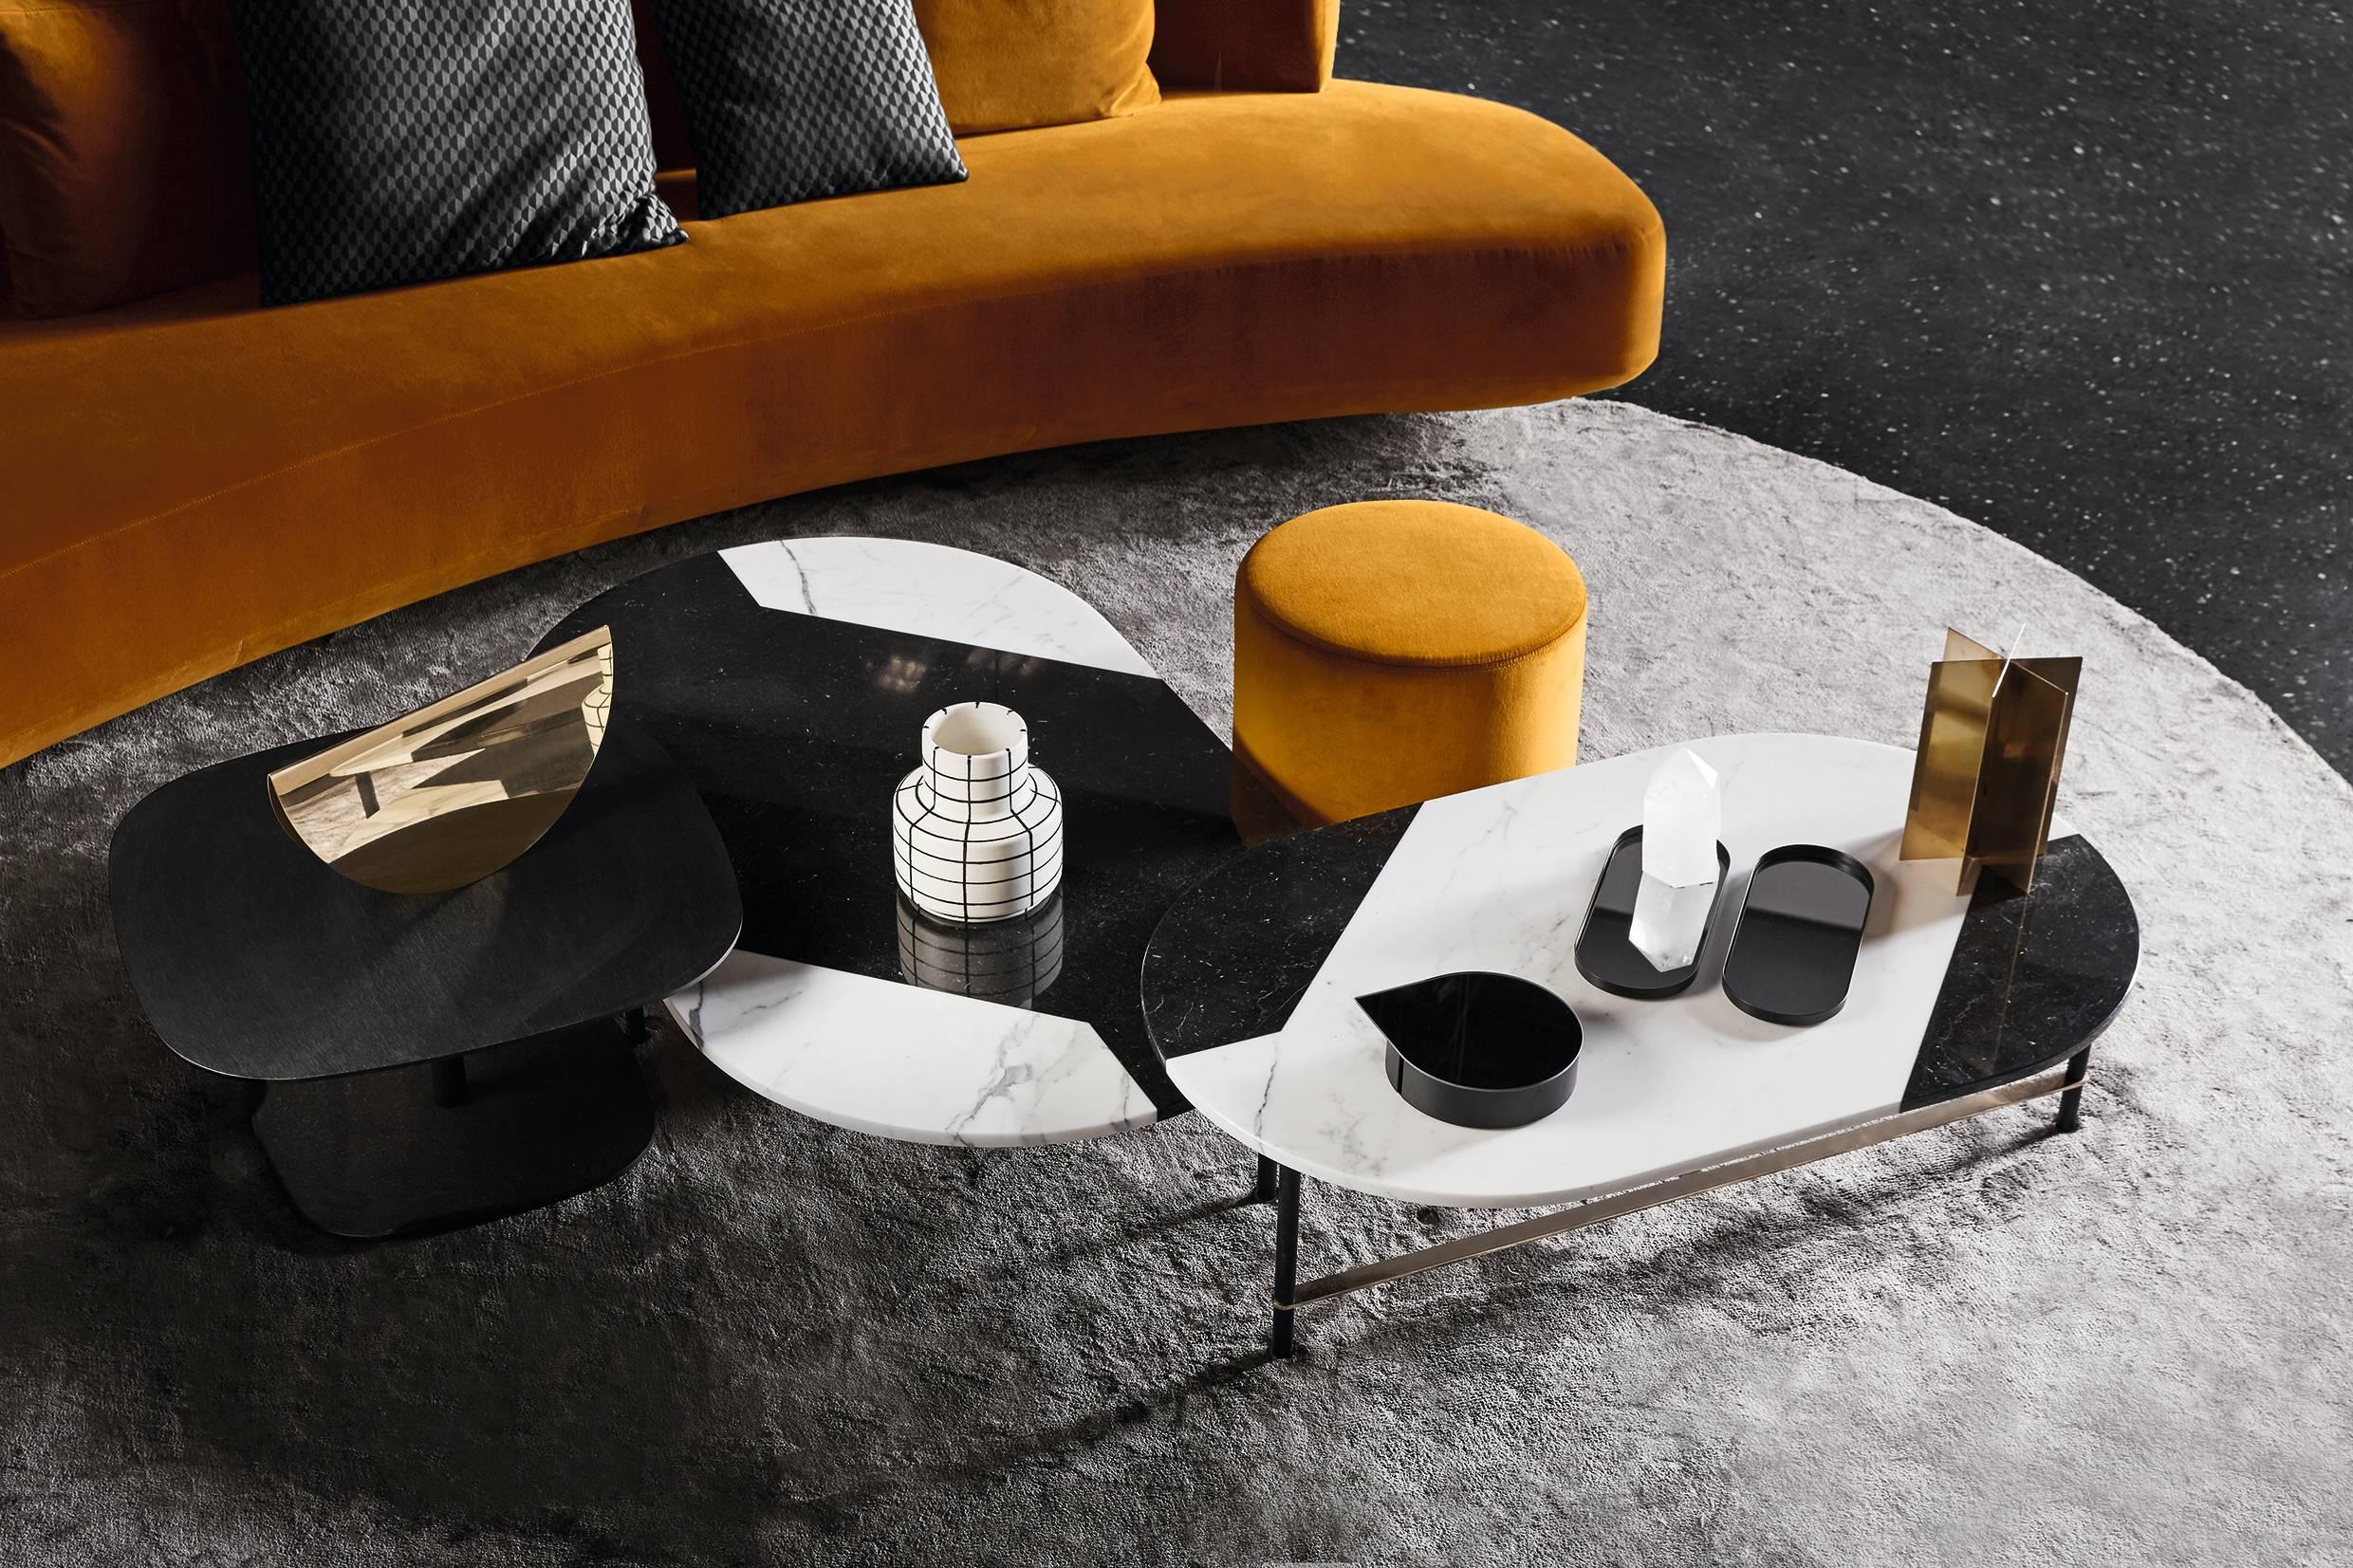 Coffee or side table with top and structure in hand-brushed aluminum in the colors black, titanium grey or gold.

Four sizes available: 

Cm
A 40 x 40 x 50 H
B 60 x 60 x 45 H
C 60 x 60 x 30 H 989
D 60 x 60 x 25 H

Inches
A 15¾